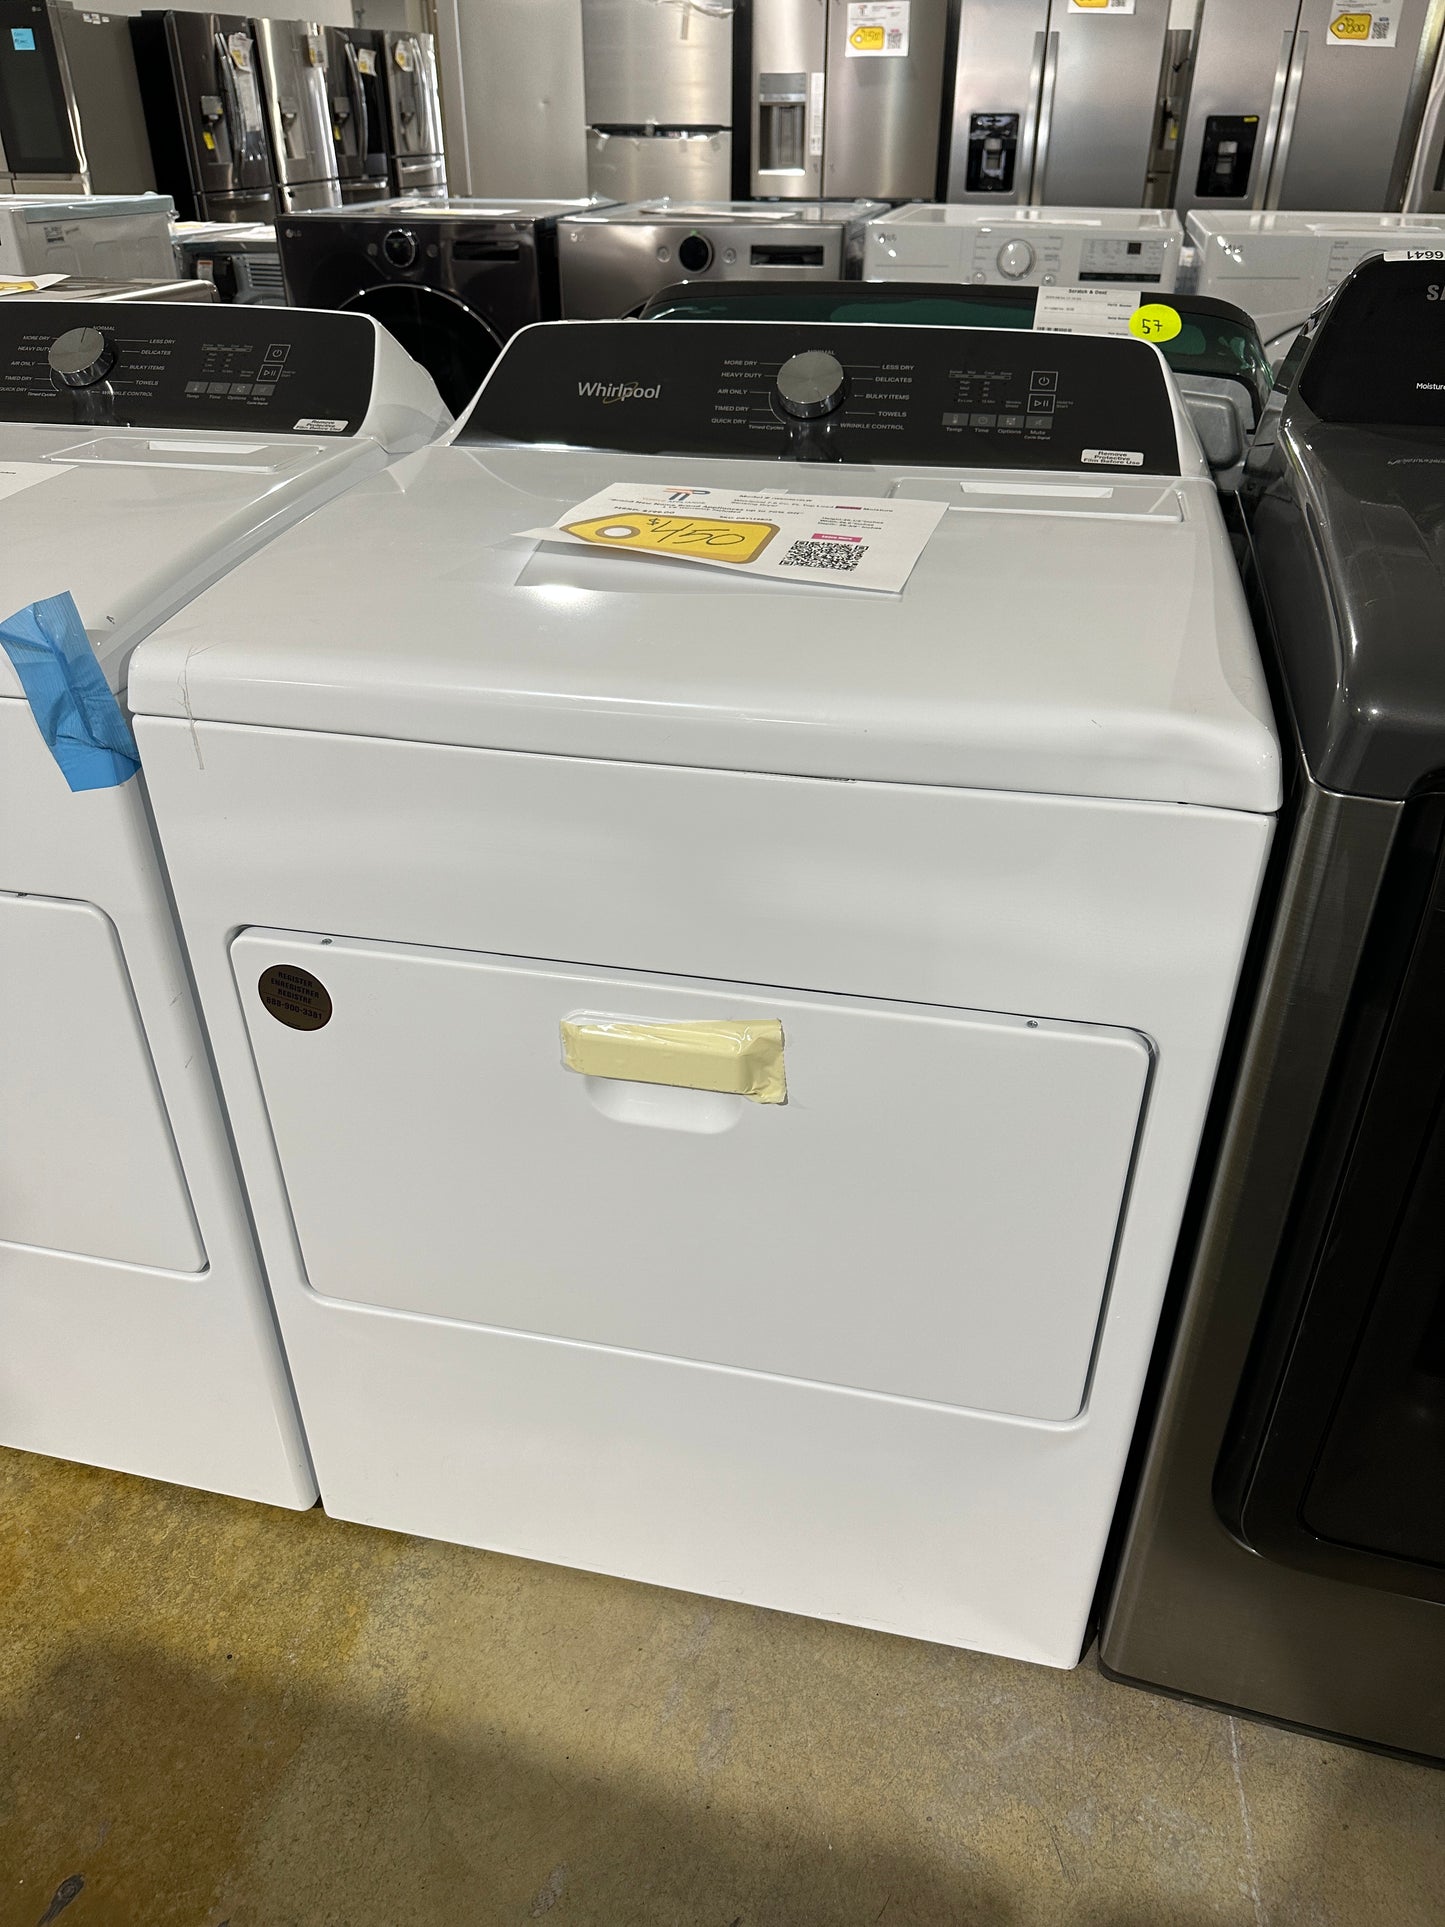 Whirlpool - 7 Cu. Ft. Electric Dryer with Moisture Sensing - White  MODEL: WED5010LW  DRY11880S